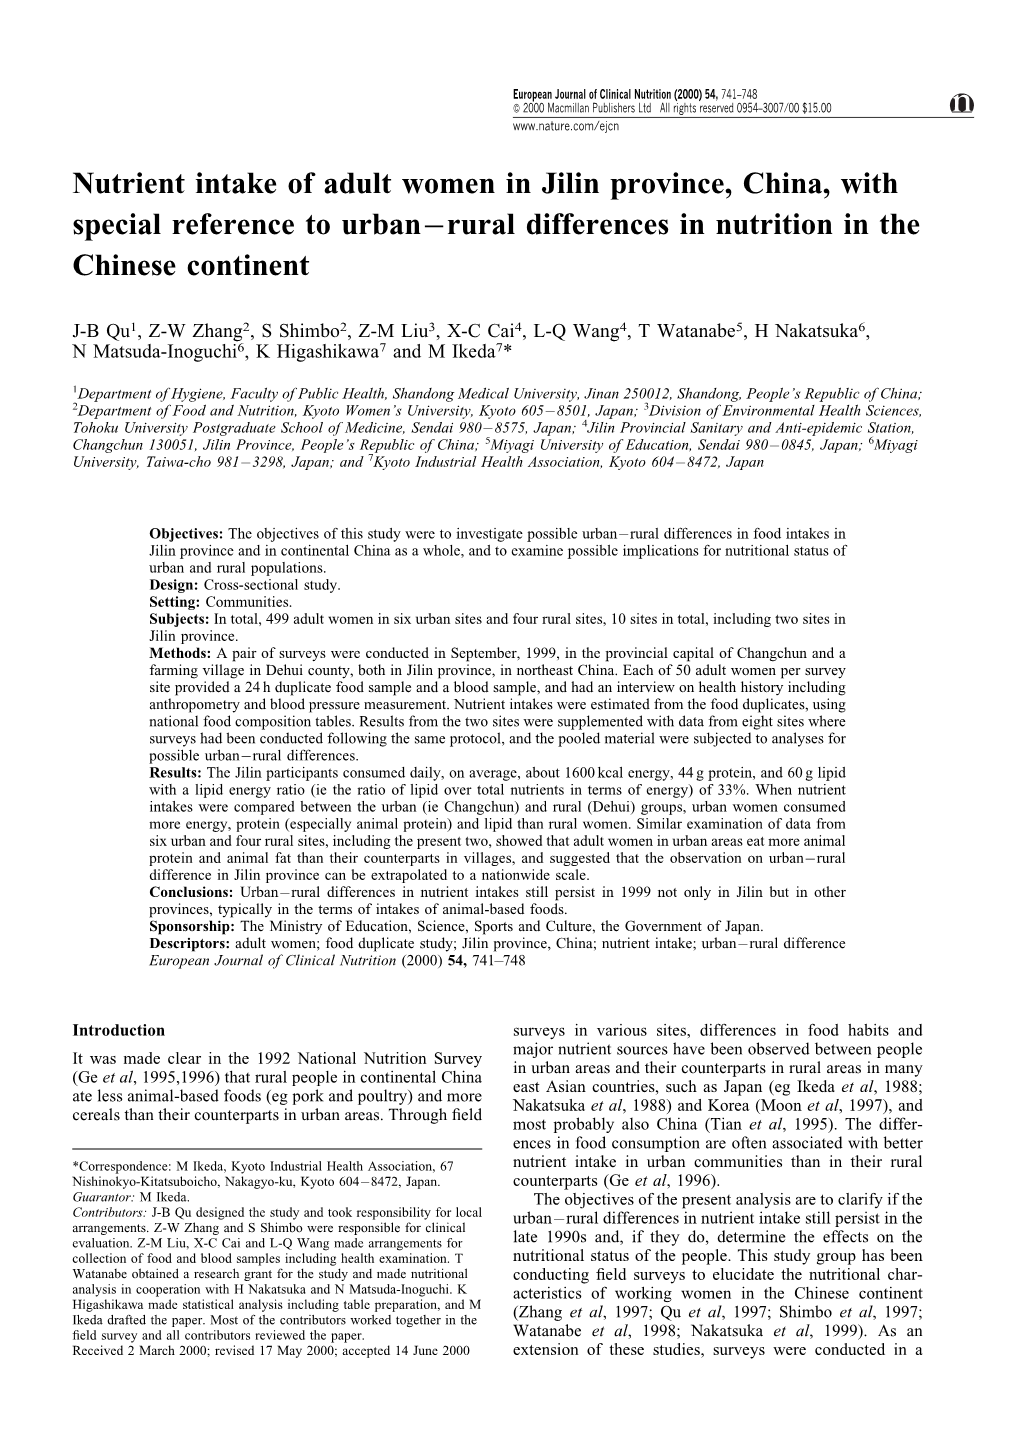 Nutrient Intake of Adult Women in Jilin Province, China, with Special Reference to Urban ± Rural Differences in Nutrition in the Chinese Continent